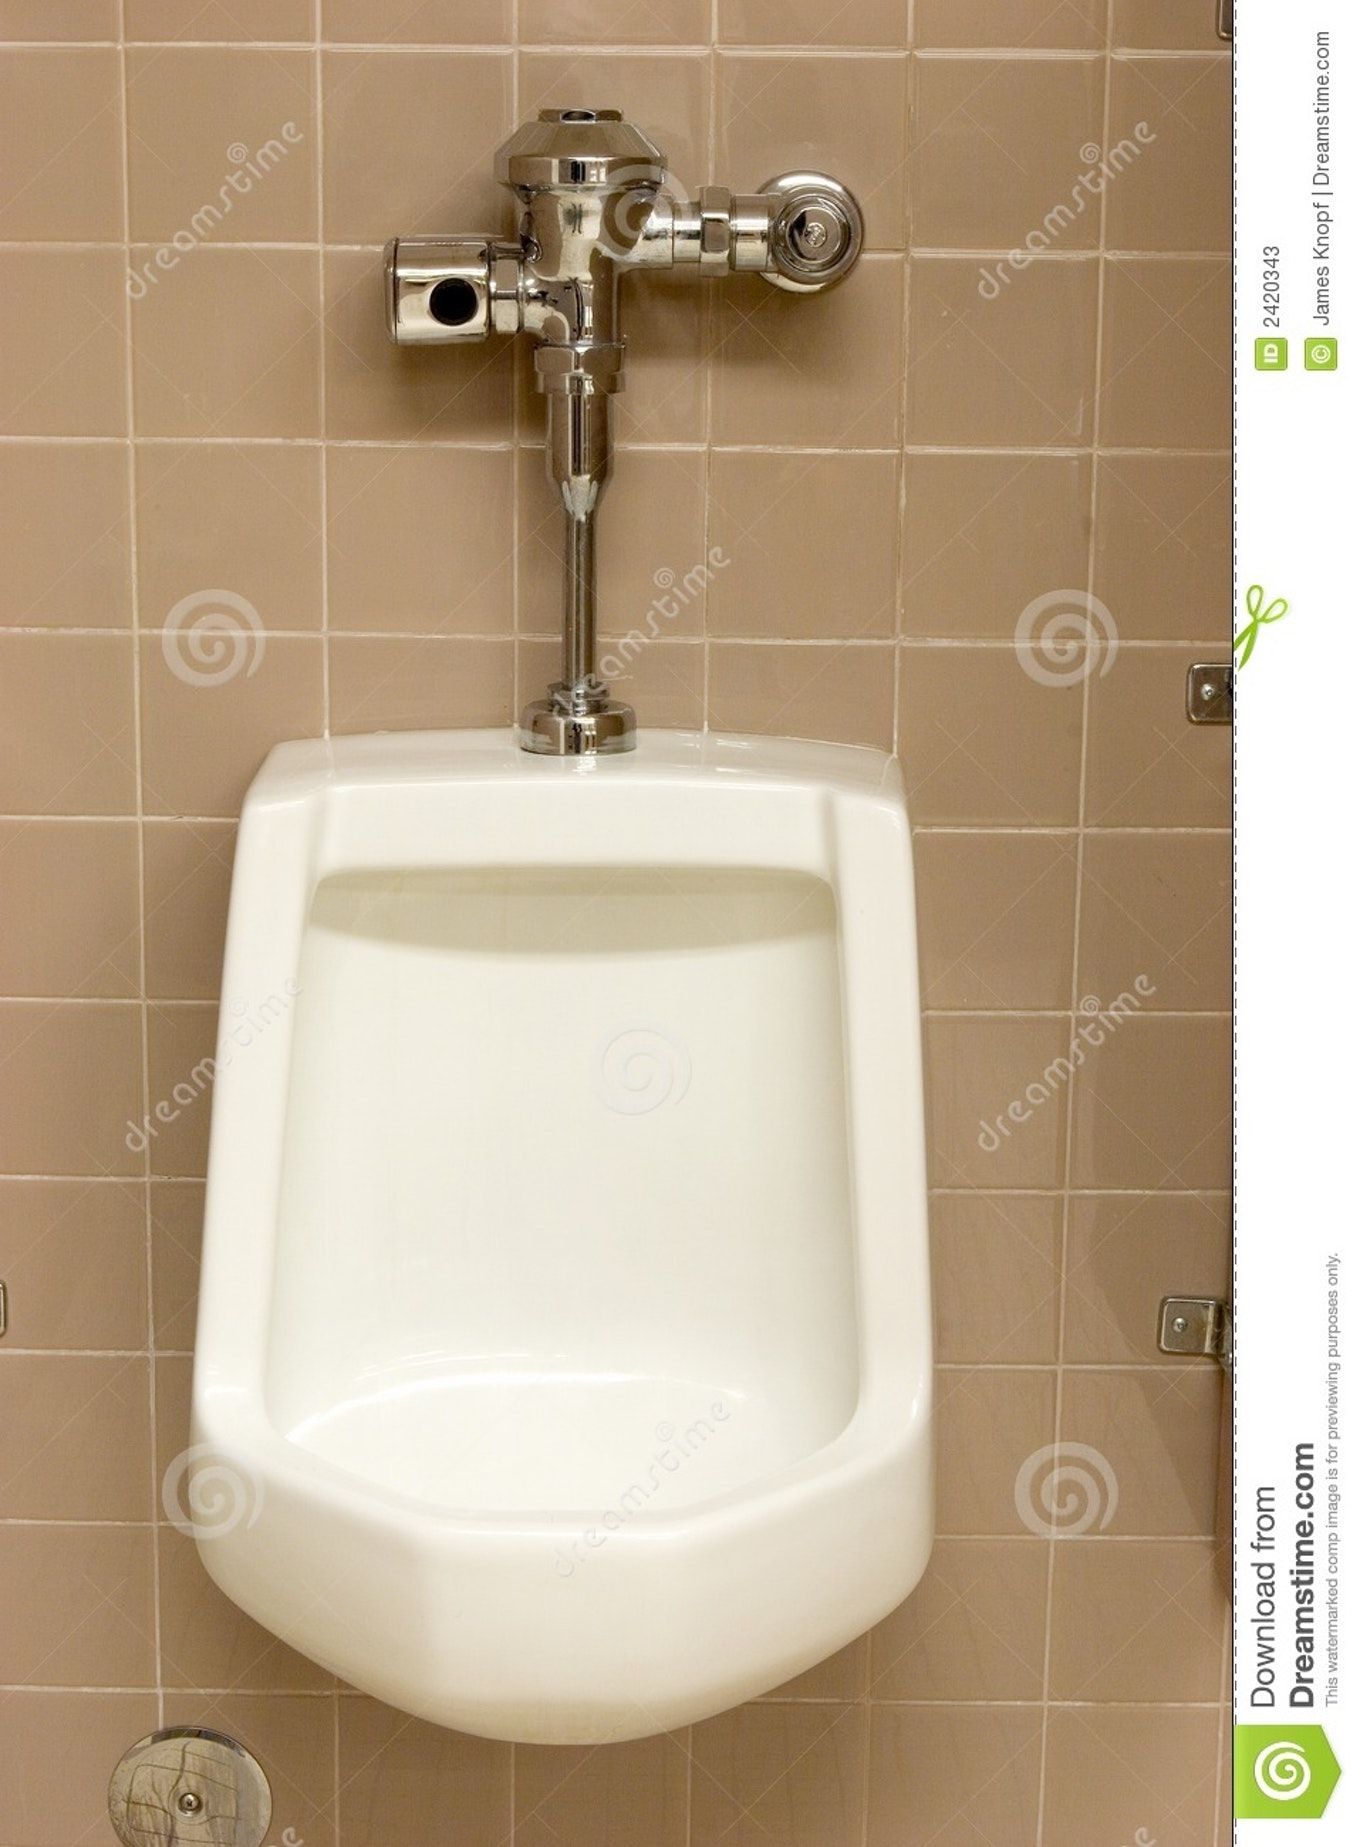 2018 Commercial Wall Art Intended For Toilet Won't Flush Not Clogged Commercial Wall Toilets Product (View 15 of 15)